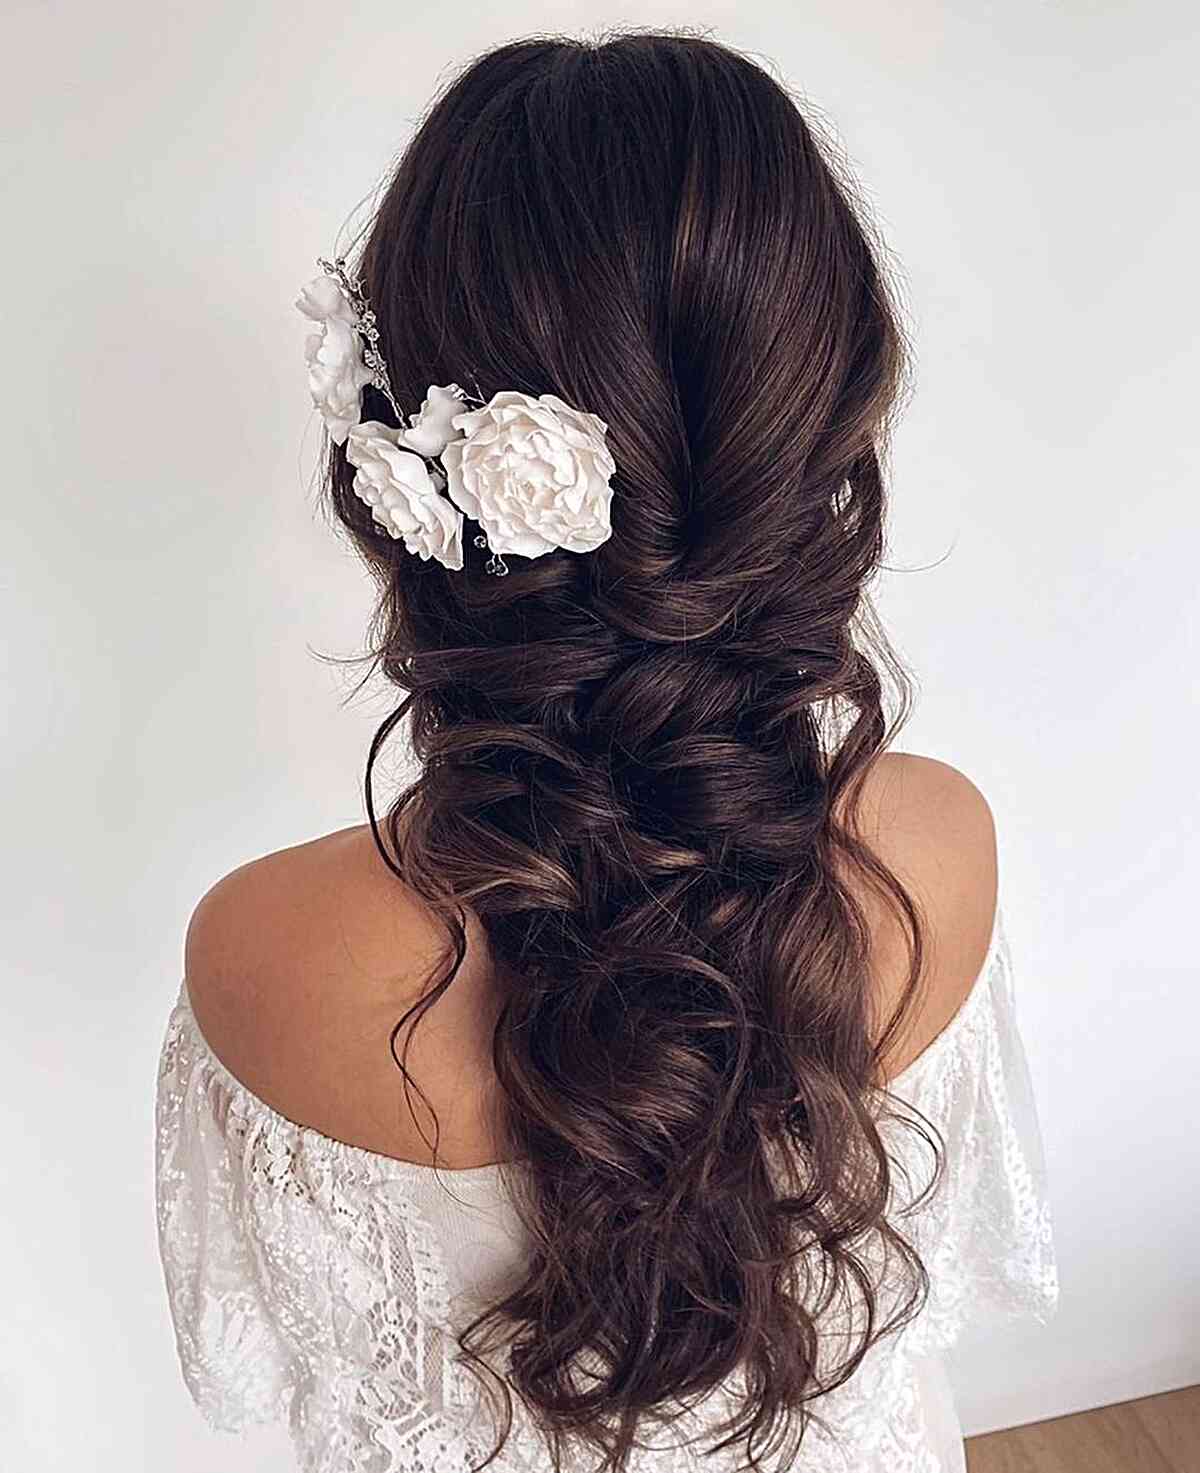 Bohemian-Inspired Dark Long Braided Hairdo for a Bridesmaid with flower accessories